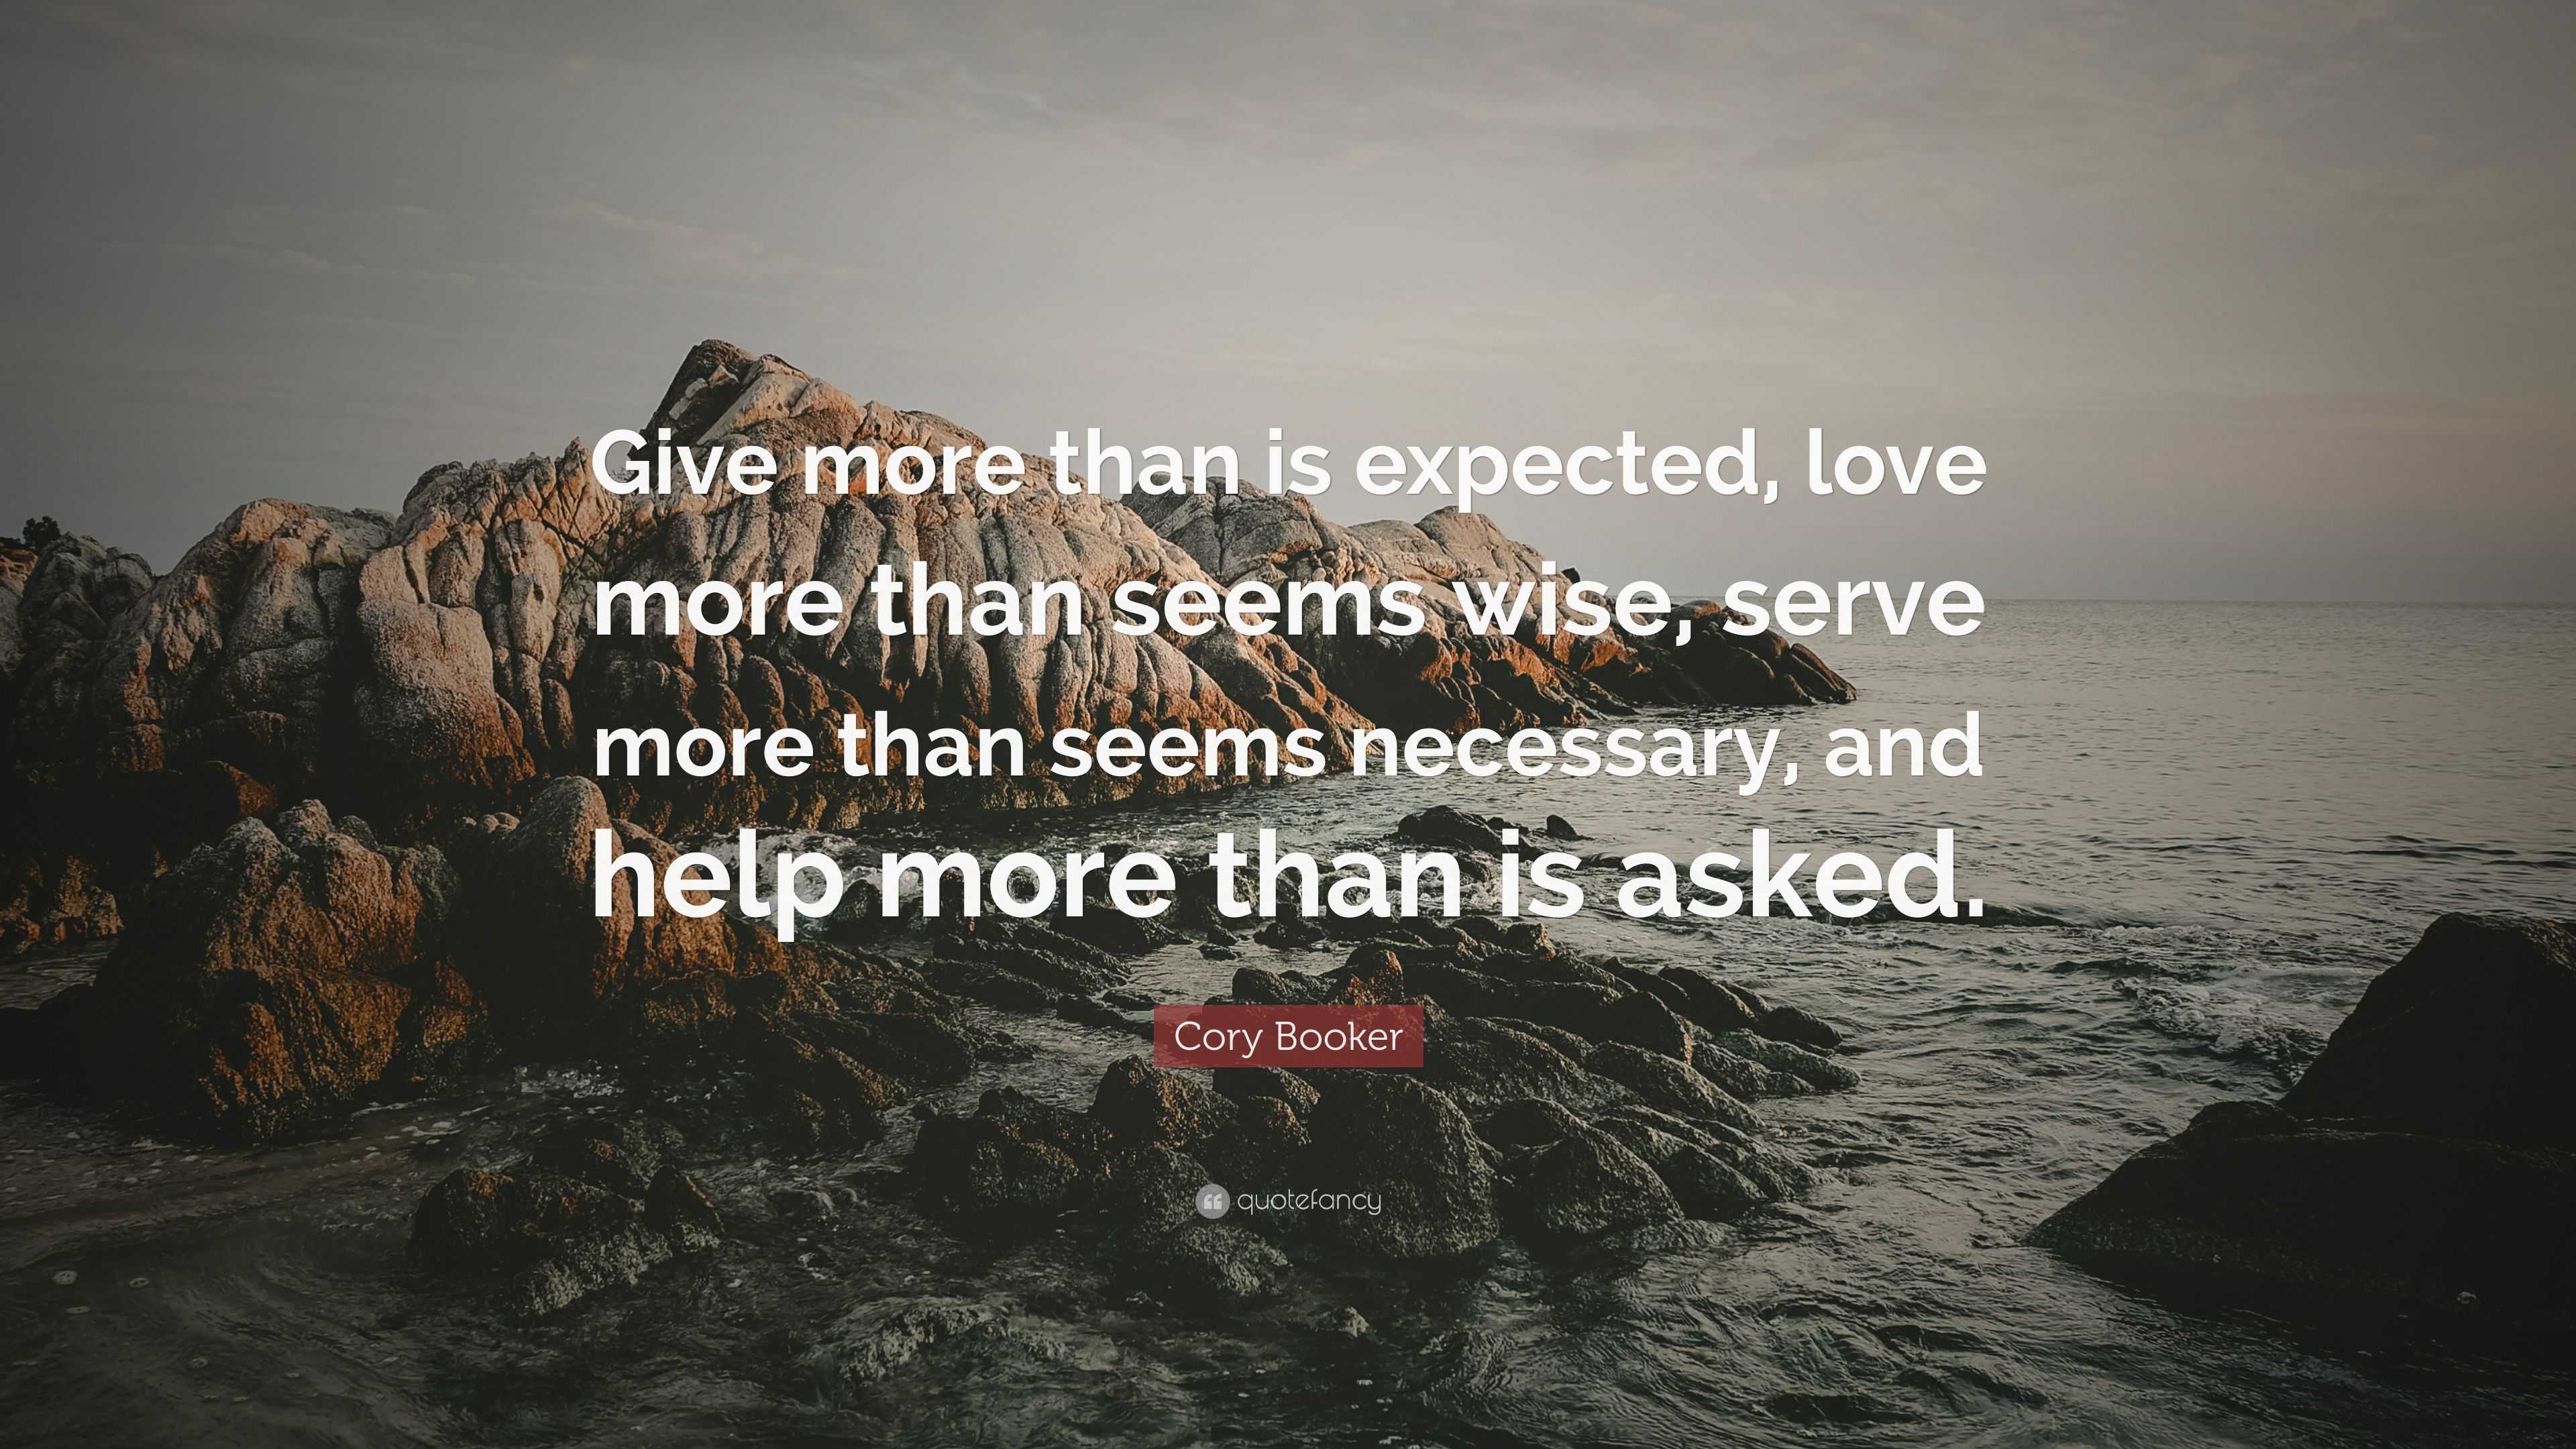 Cory Booker Quote: “Give more than is expected, love more than seems ...